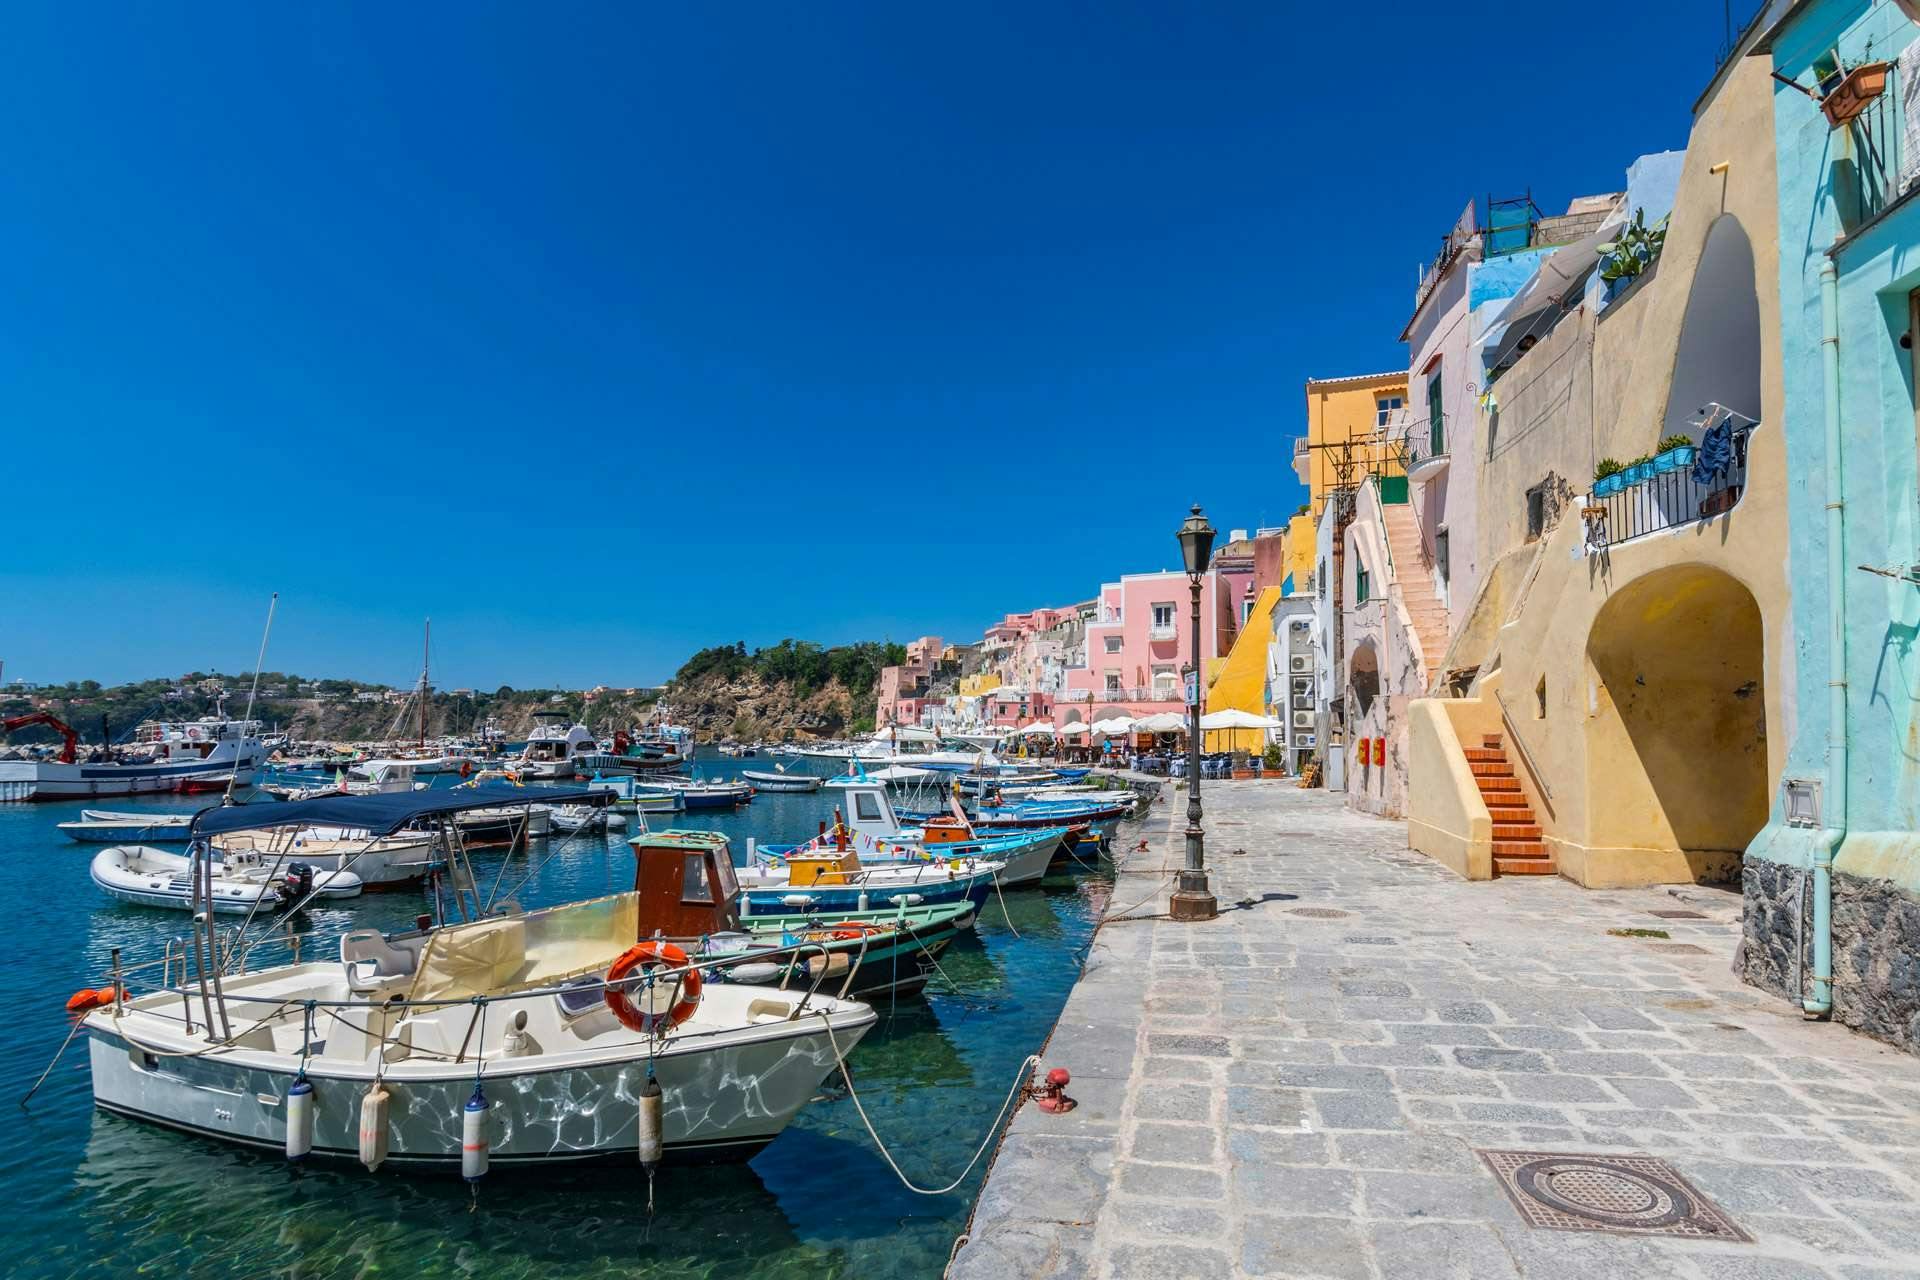 The flavour and charm of Procida island for small groups